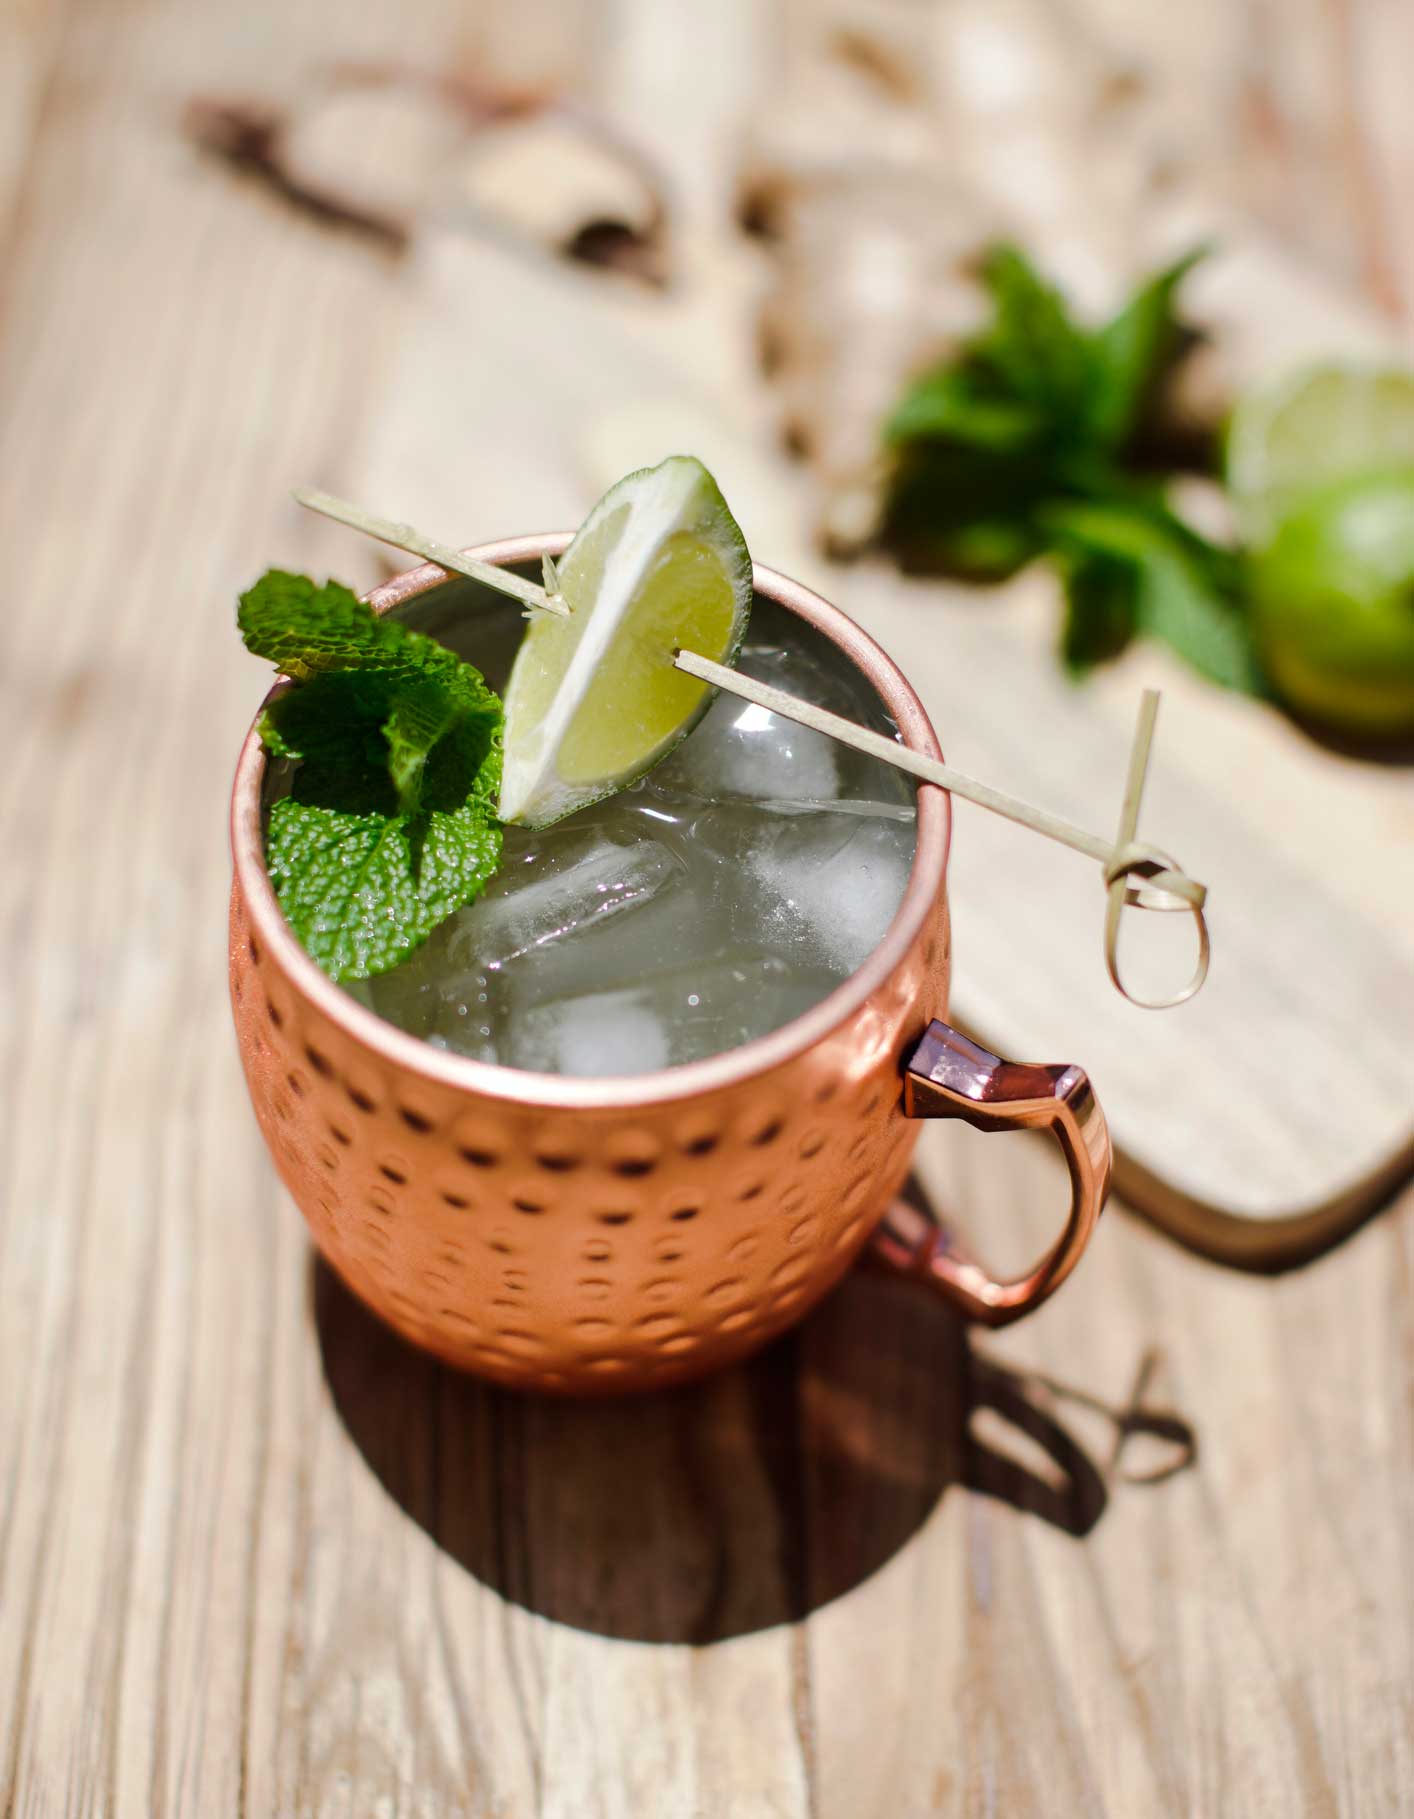 Cocktail moscow mule ingredienti - Patrick Trigger